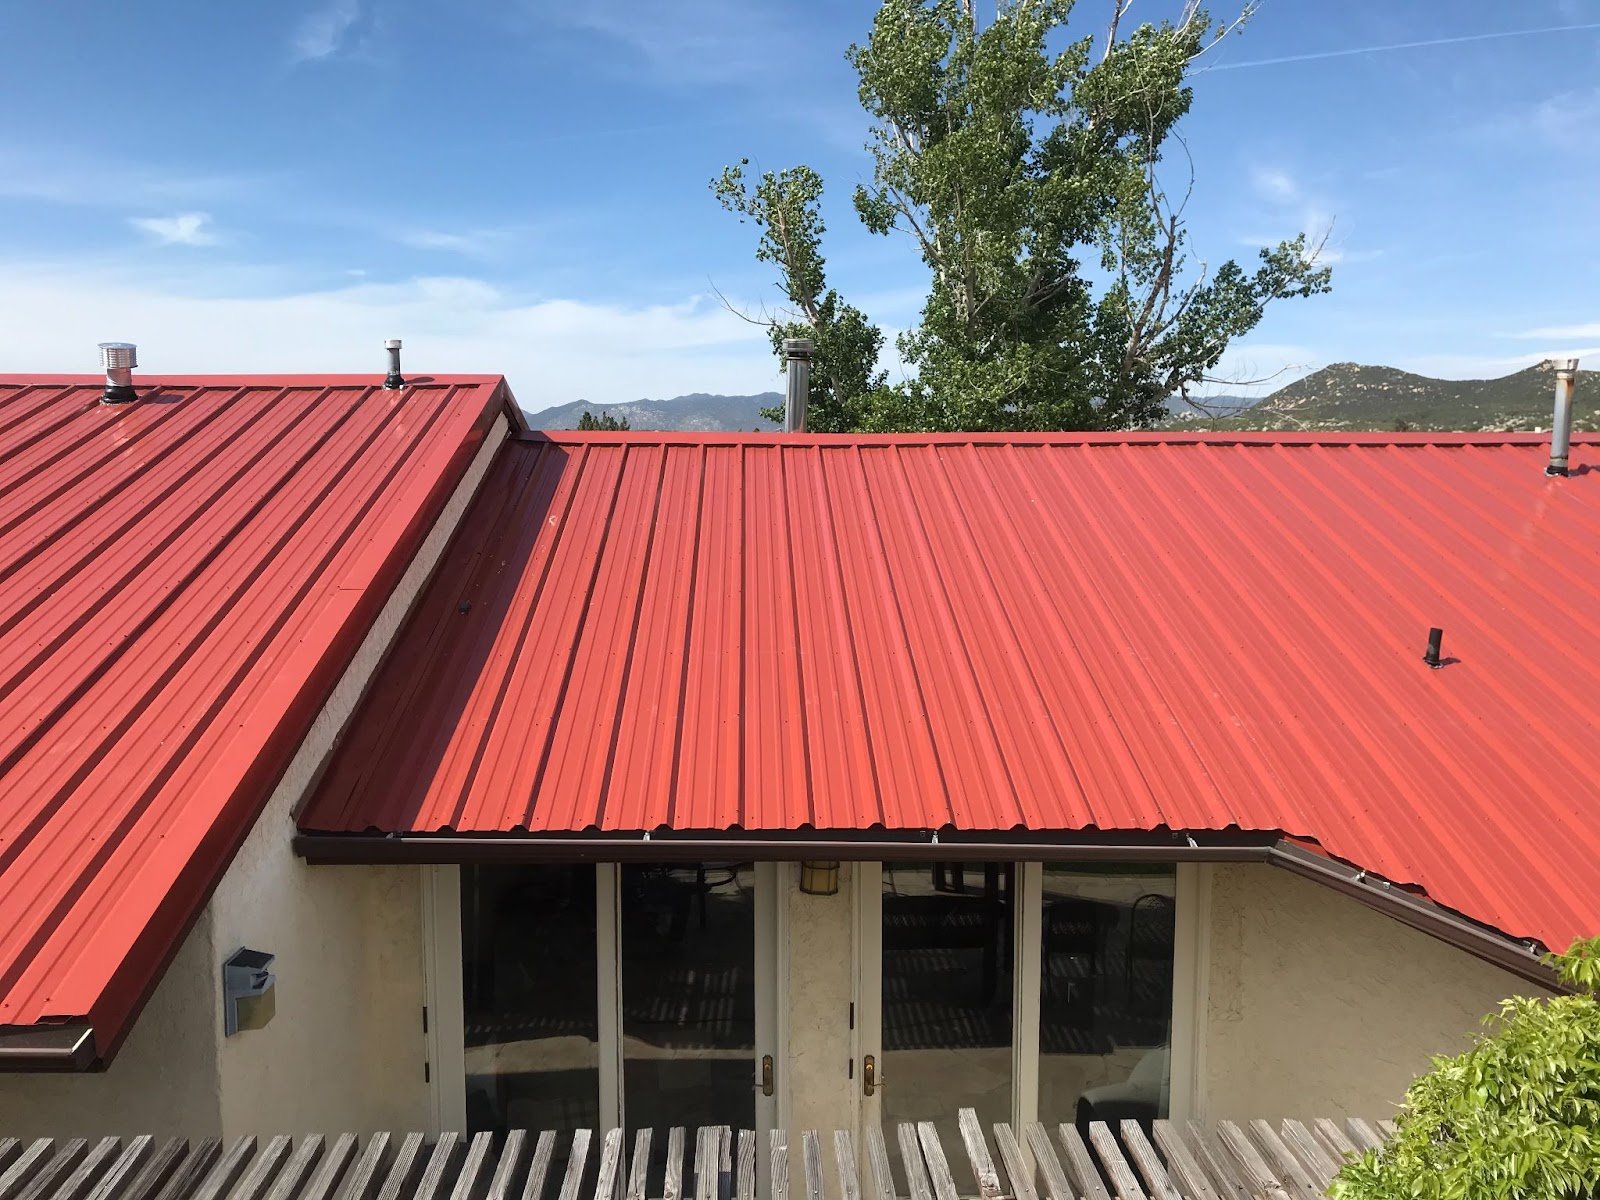 How Do I Buy From A Metal Roofing Manufacturer Near Me?